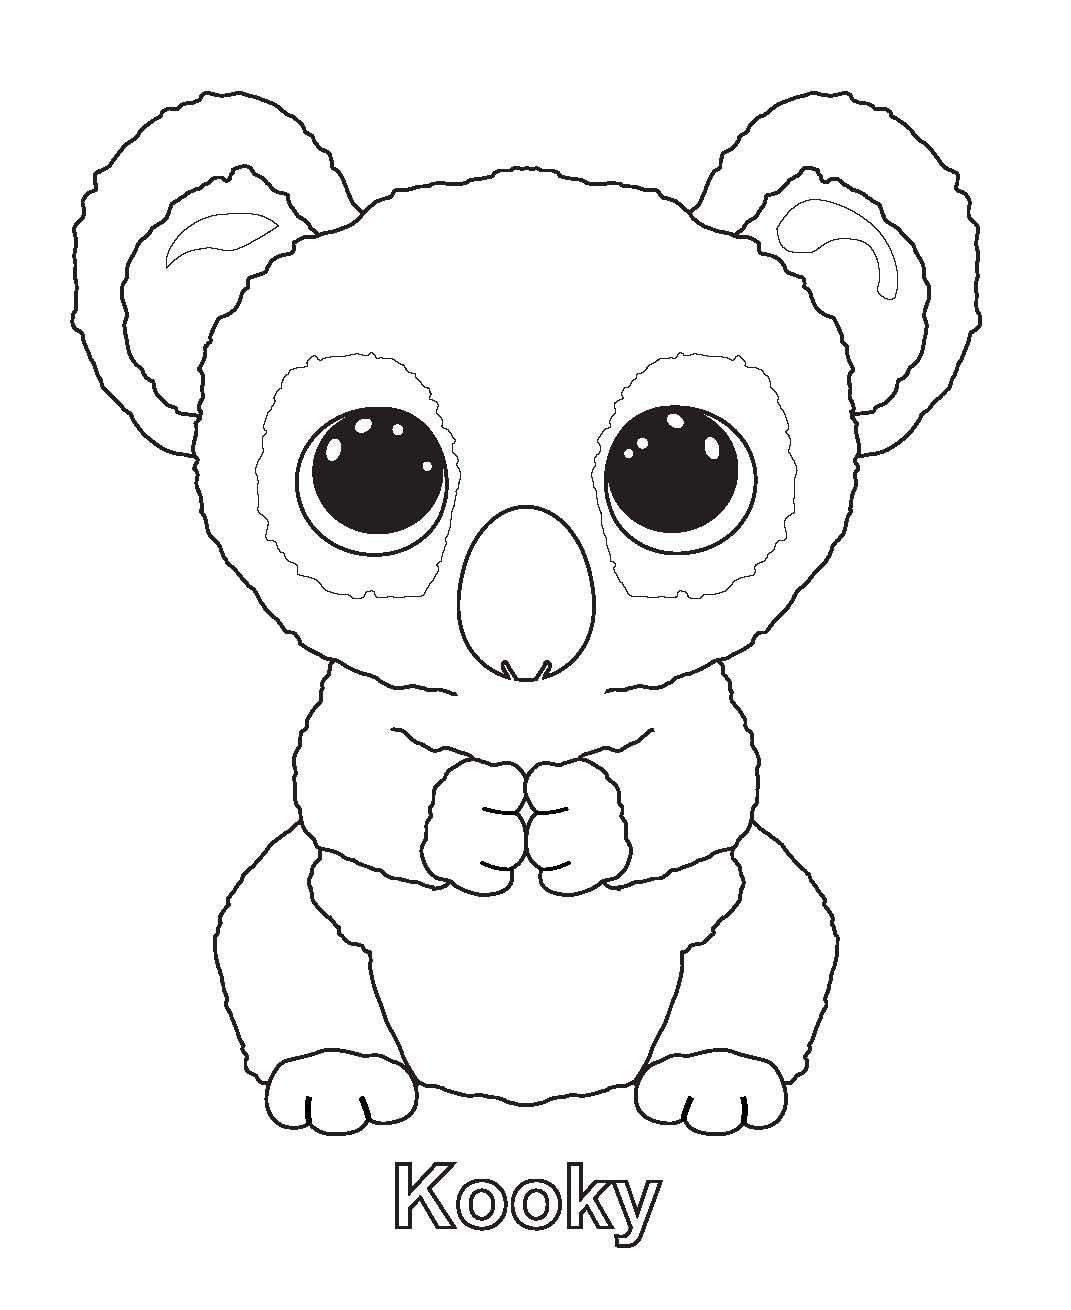 Beanie Baby Coloring Pages
 Ty beanie boo coloring pages and print for free